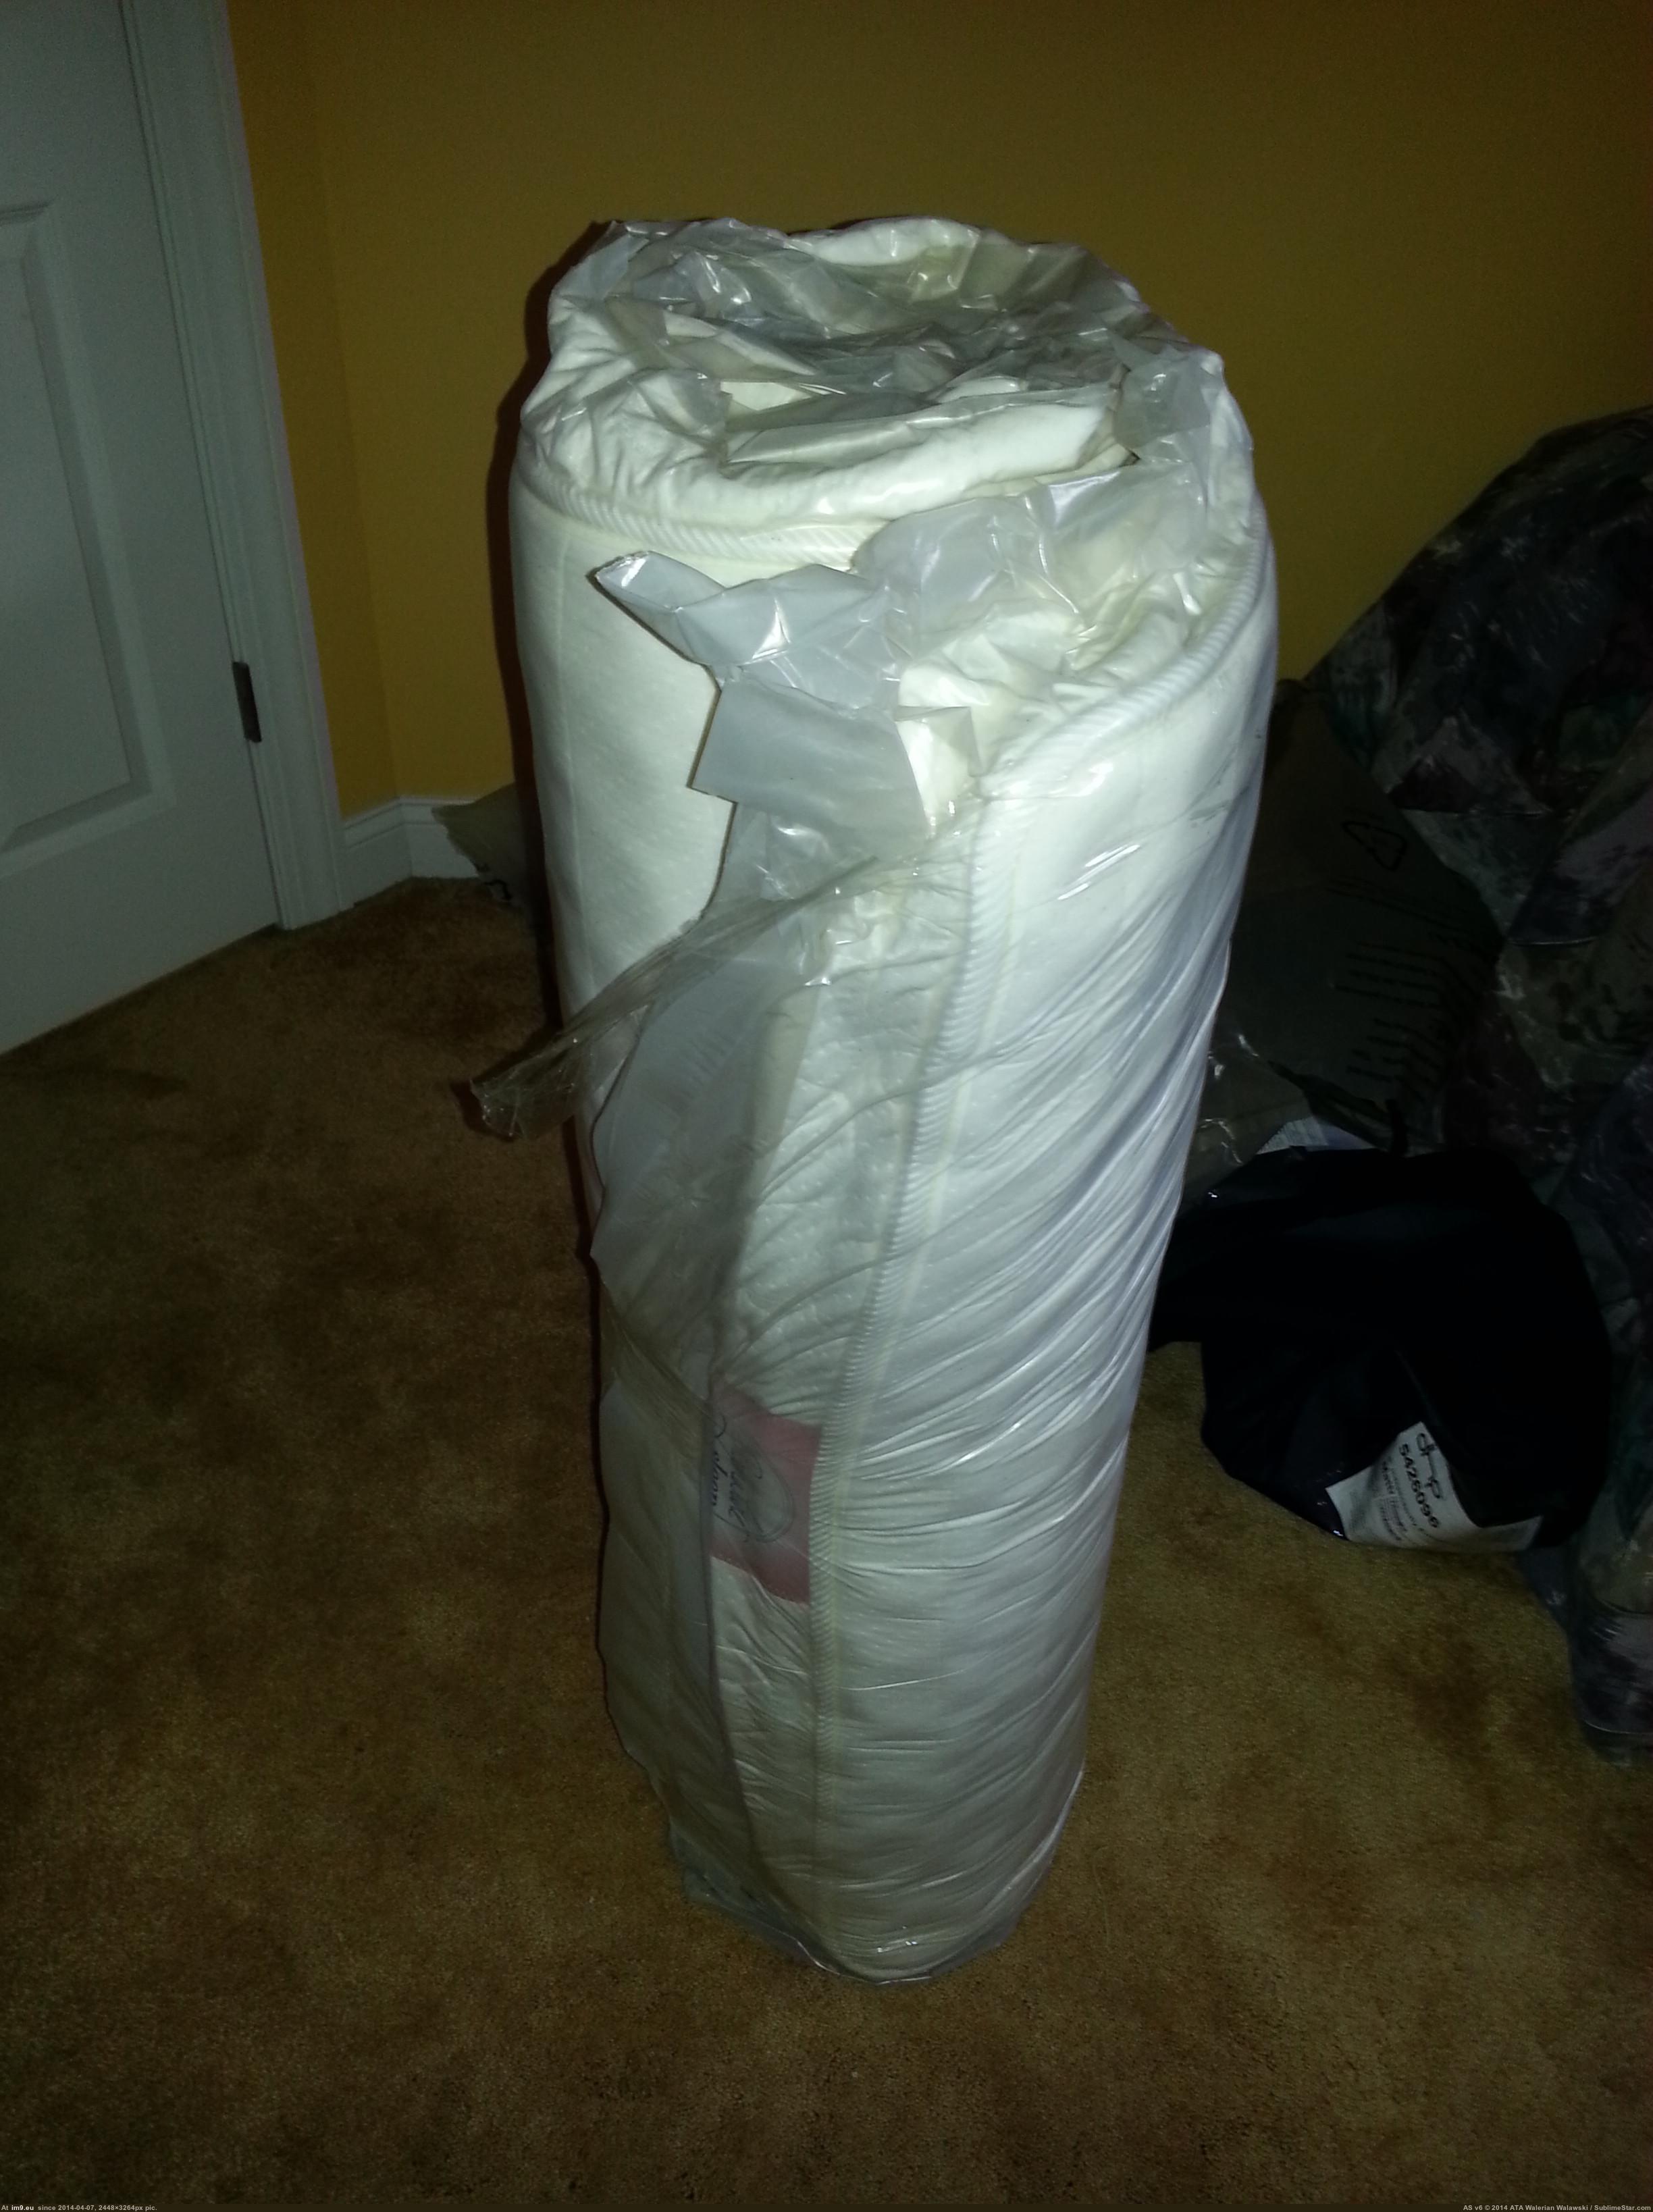 http://p.im9.eu/mildlyinteresting-got-a-mattress-in-a-duffle-bag-today-unrolled-it-and-broke-the-vacuum-seal-6.jpg